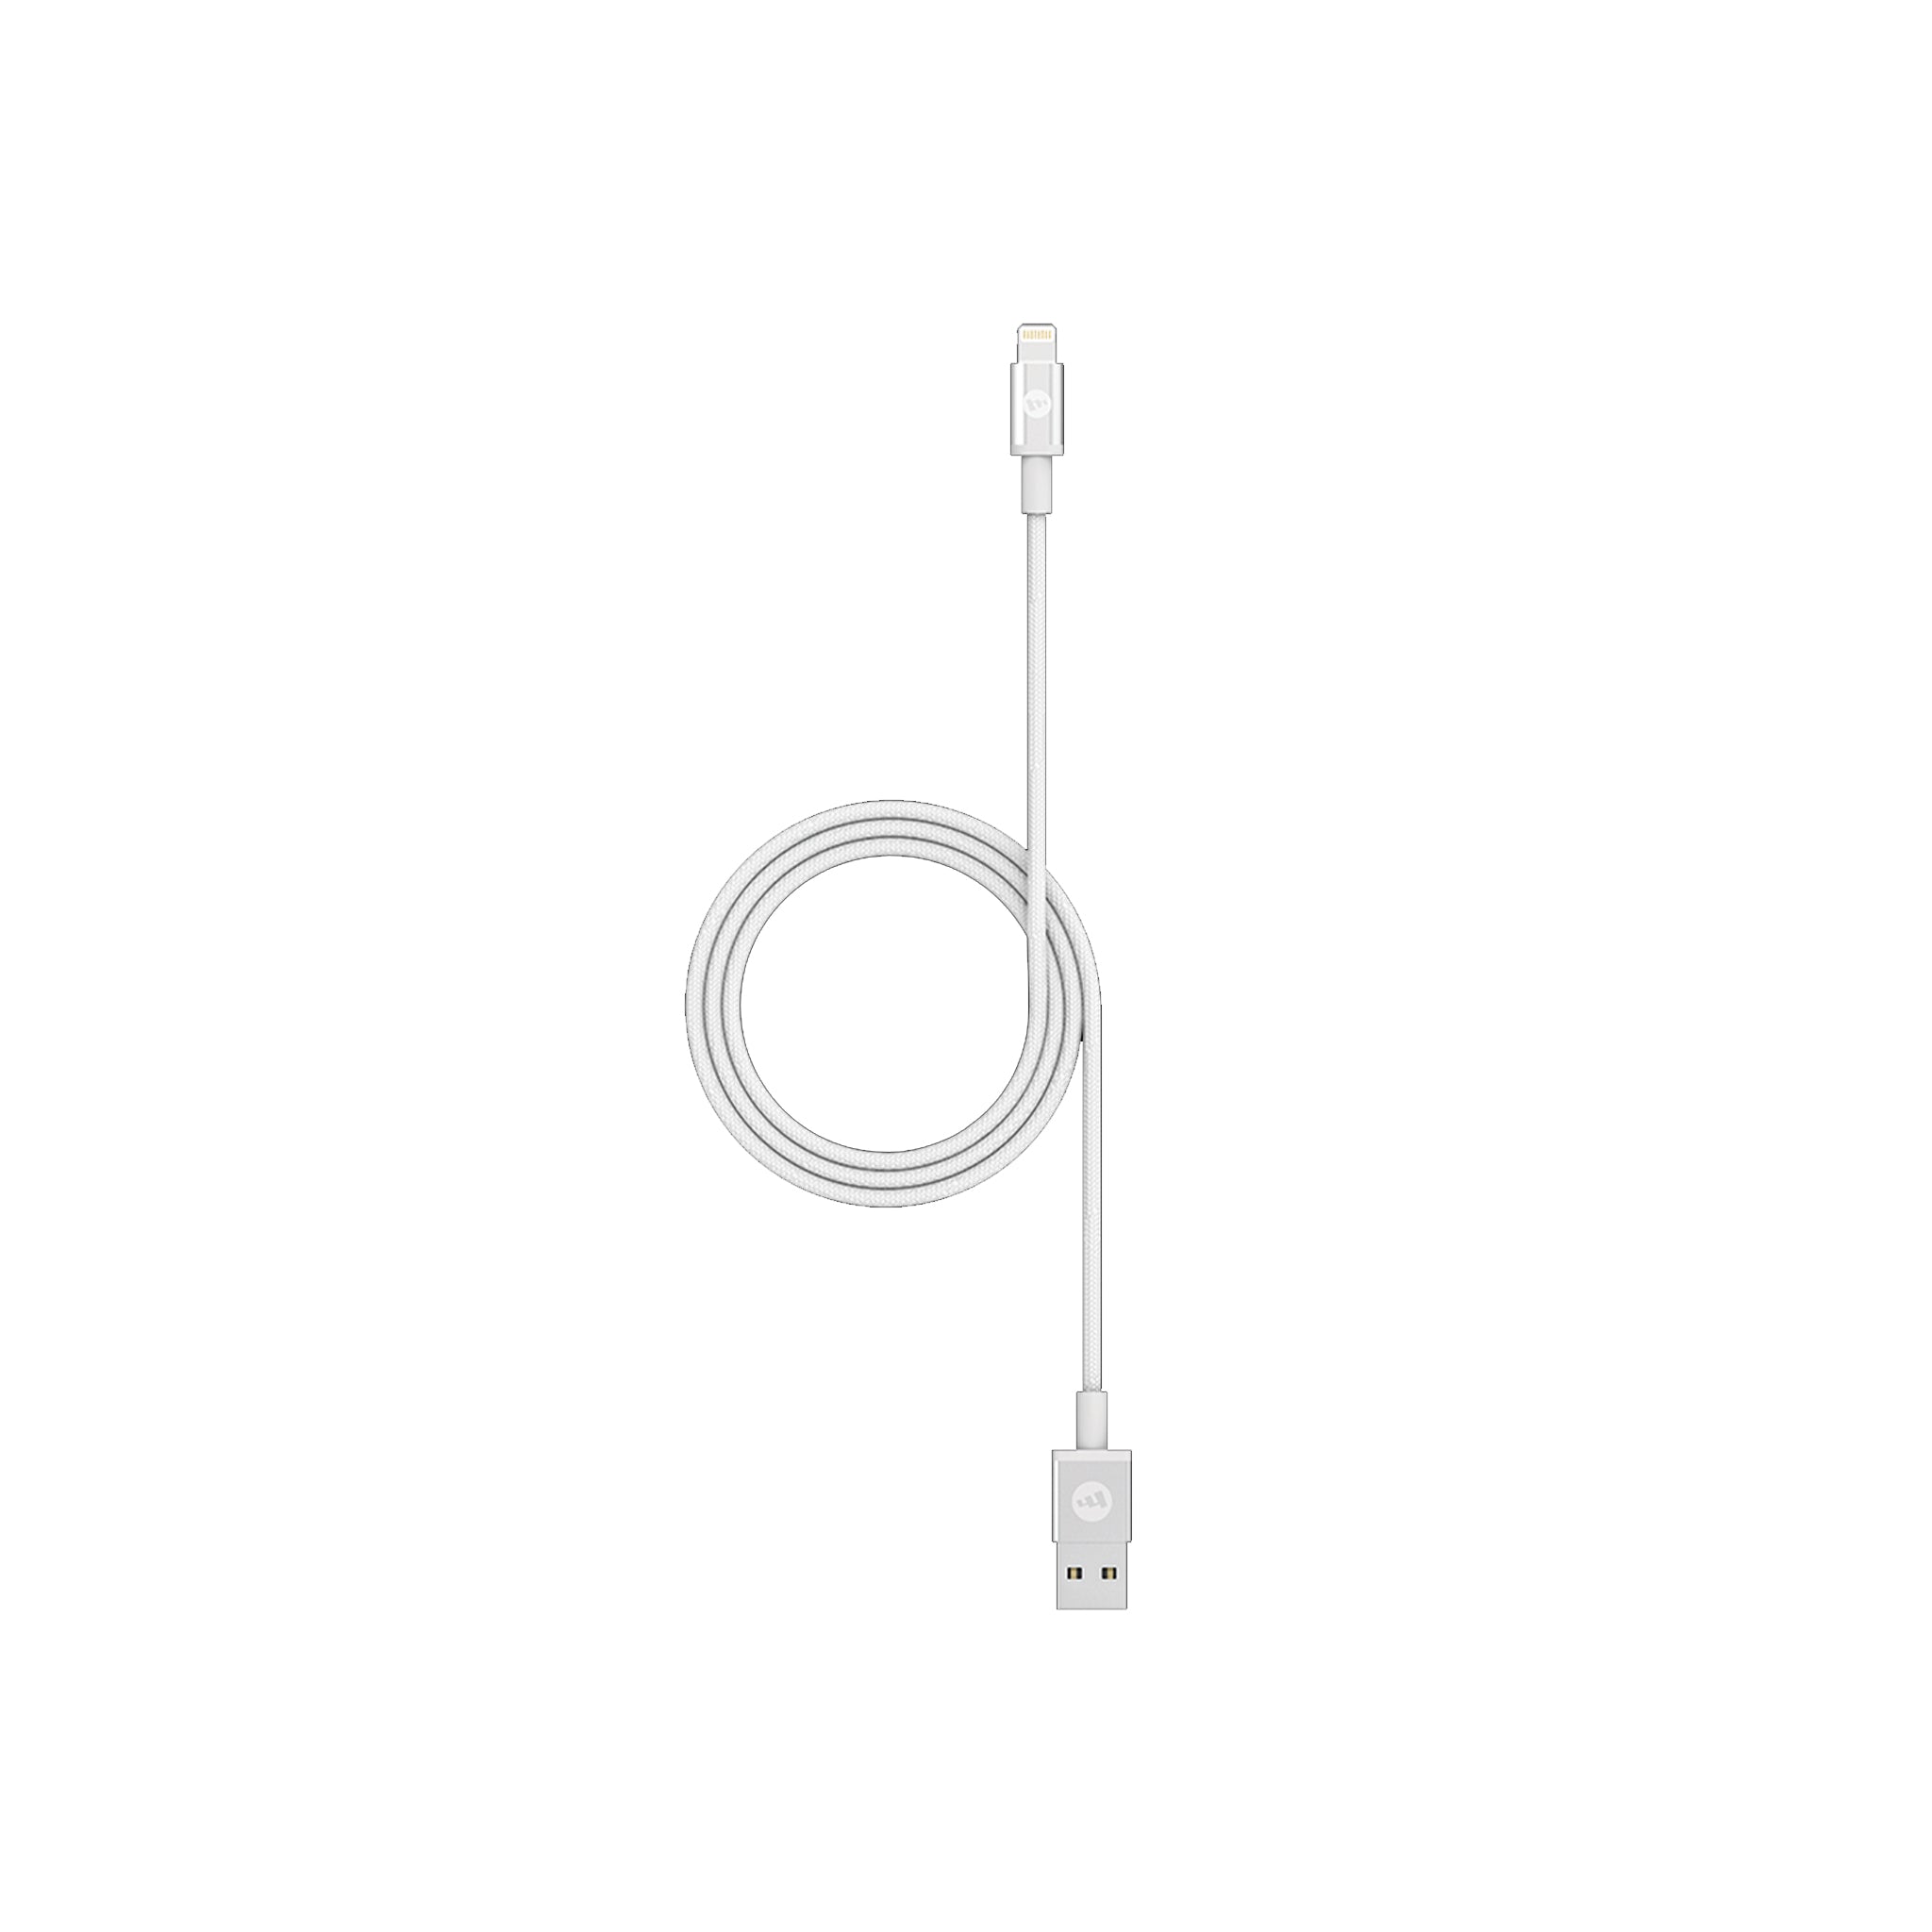 Mophie - Type A To Apple Lightning Cable 3ft - White